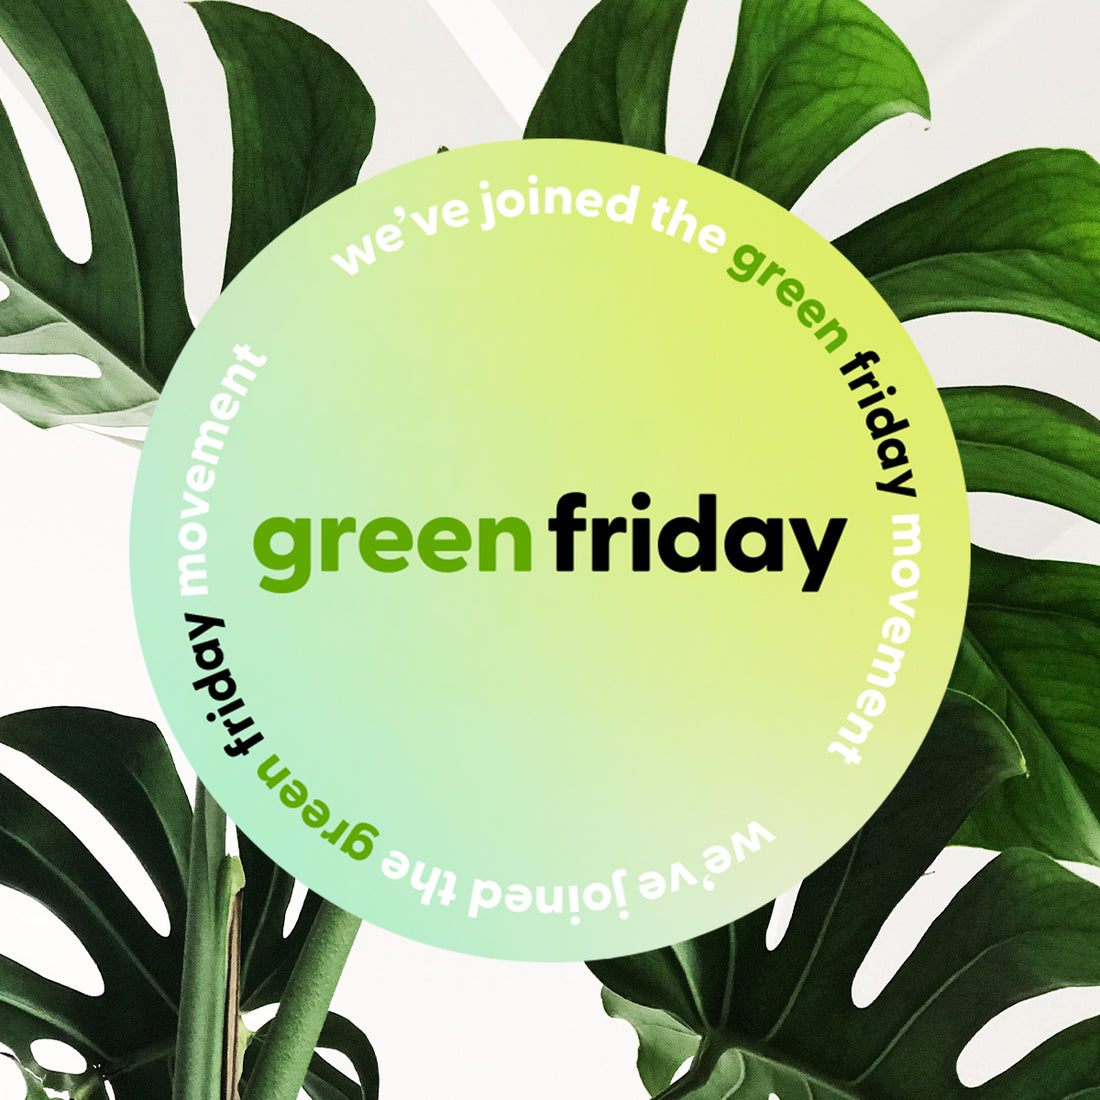 Green friday with Reer Endz Men's underwear. Sustainable shopping by choosing eco friendly products.g